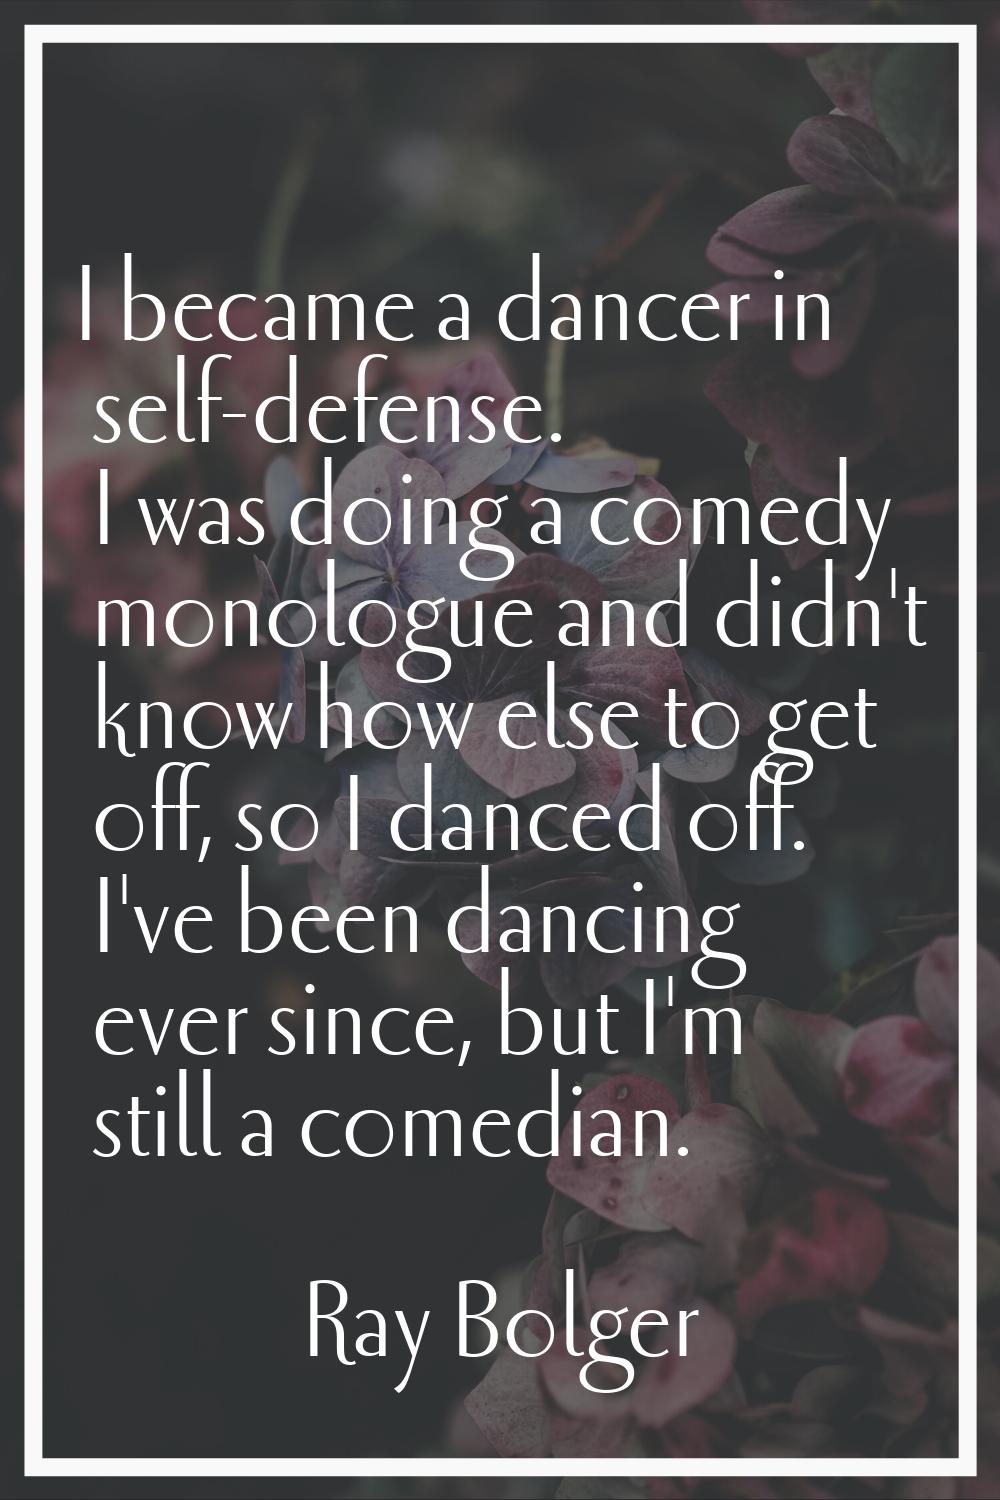 I became a dancer in self-defense. I was doing a comedy monologue and didn't know how else to get o